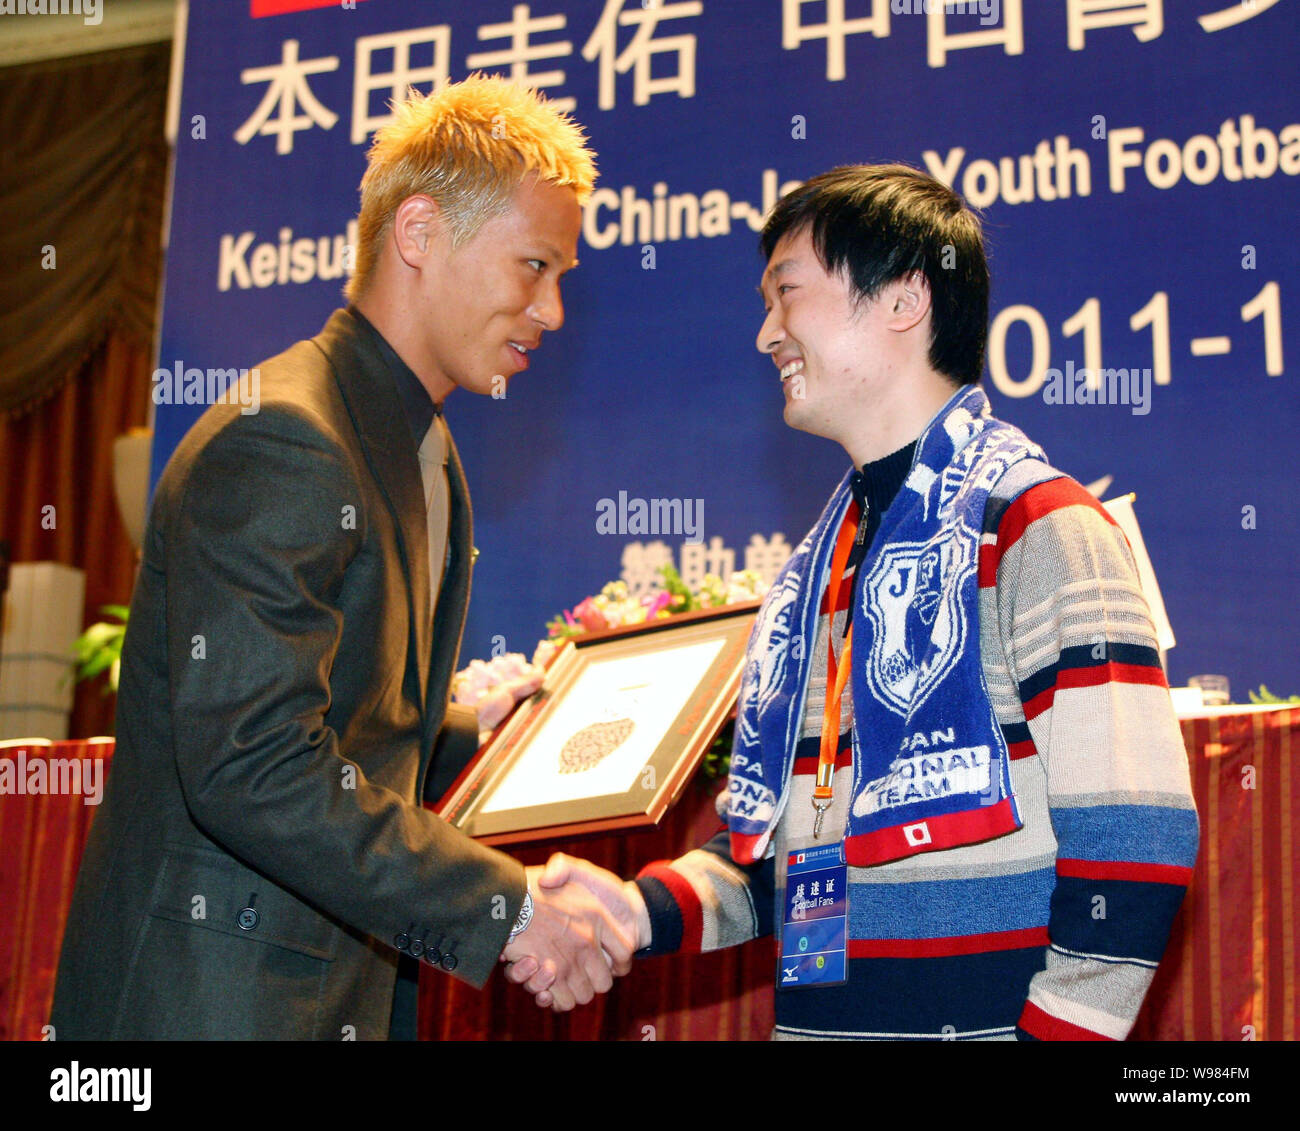 Japanese football player Keisuke Honda, left, shakes hands with a soccer fan at a press conference for the China-Japan Youth Football Exchange Program Stock Photo